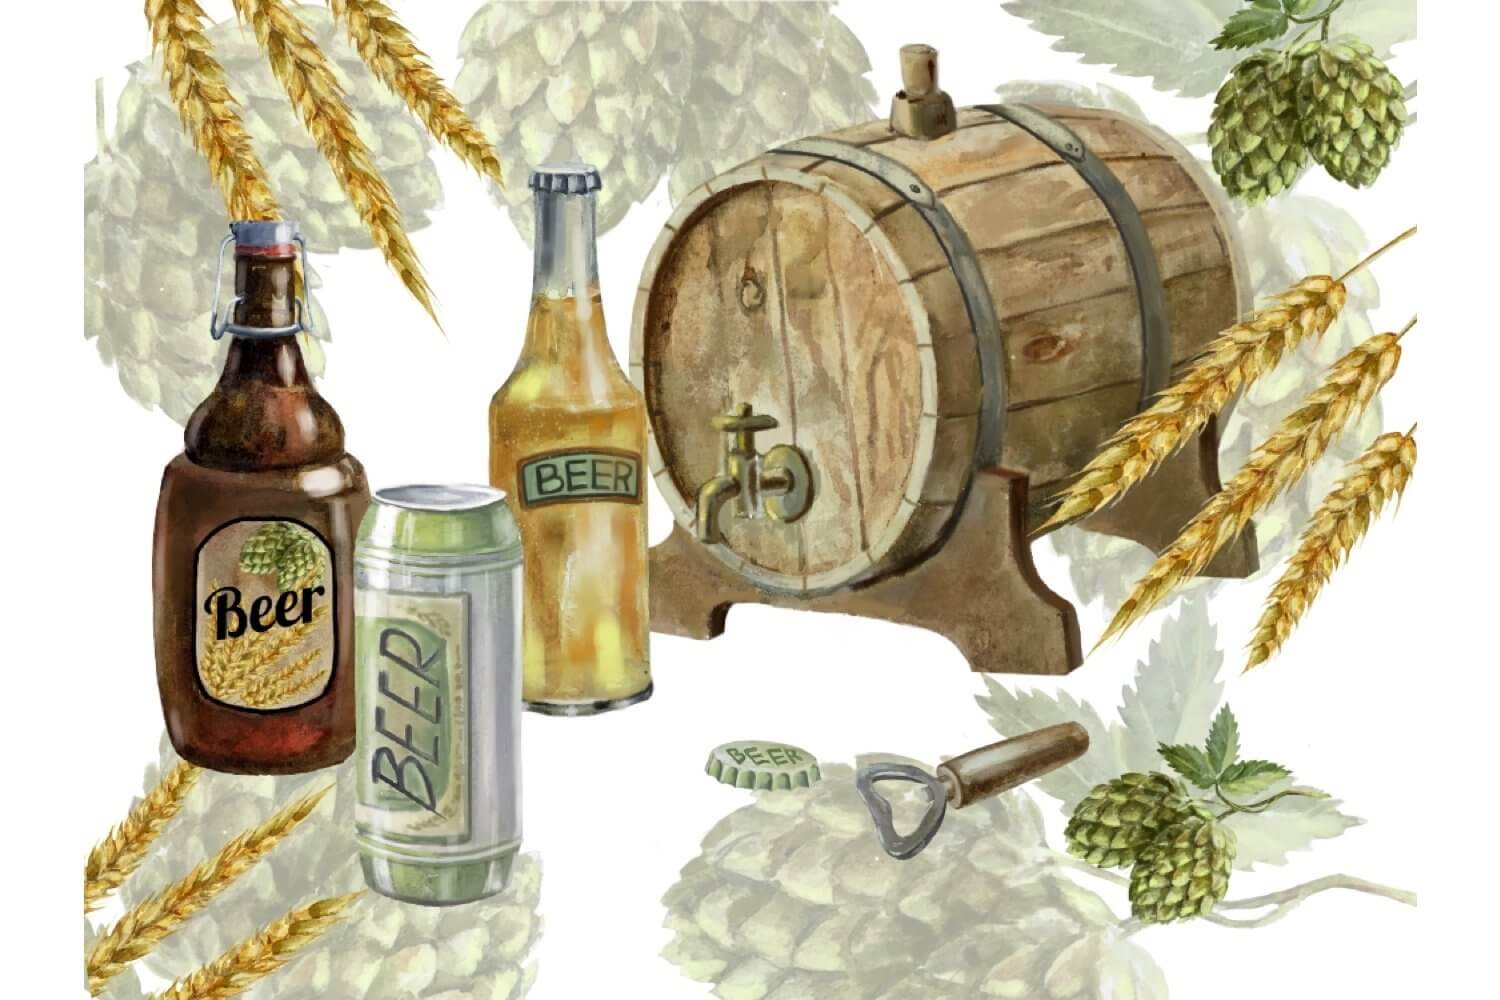 An image of a wooden barrel with beer, as well as bottles and glasses with this drink.